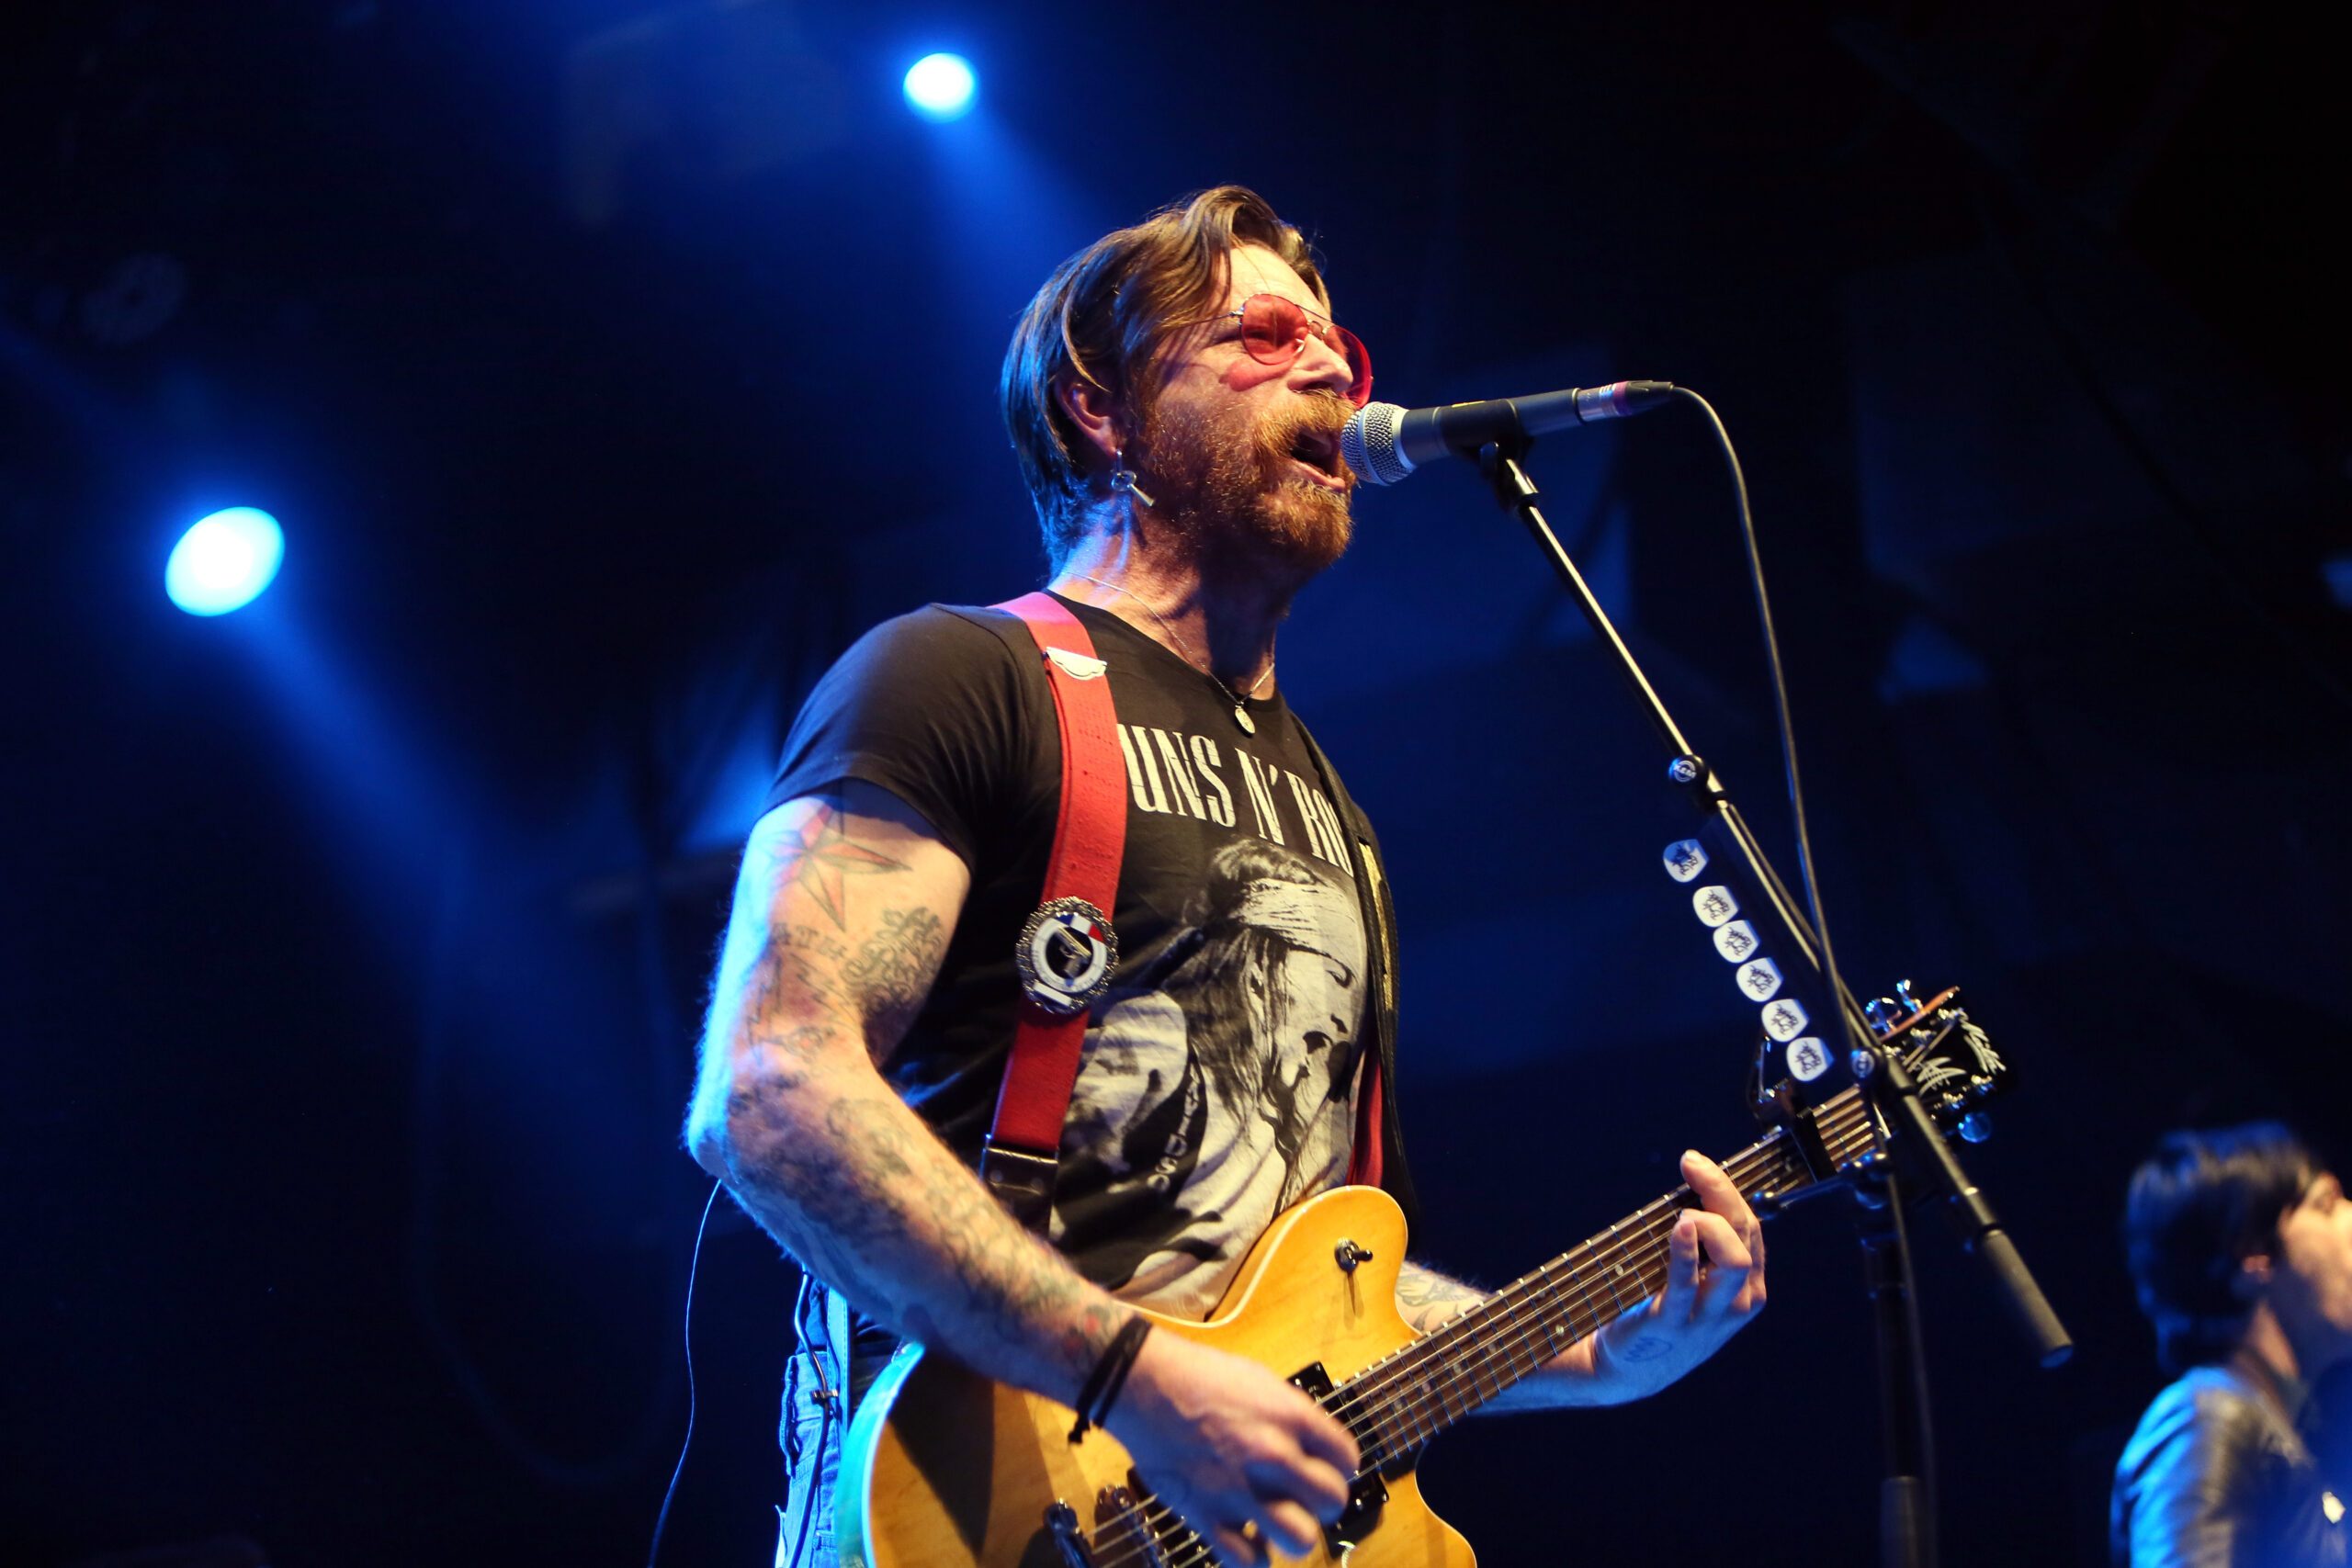 Eagles of Death Metal cancel Europe gigs after singer’s injury